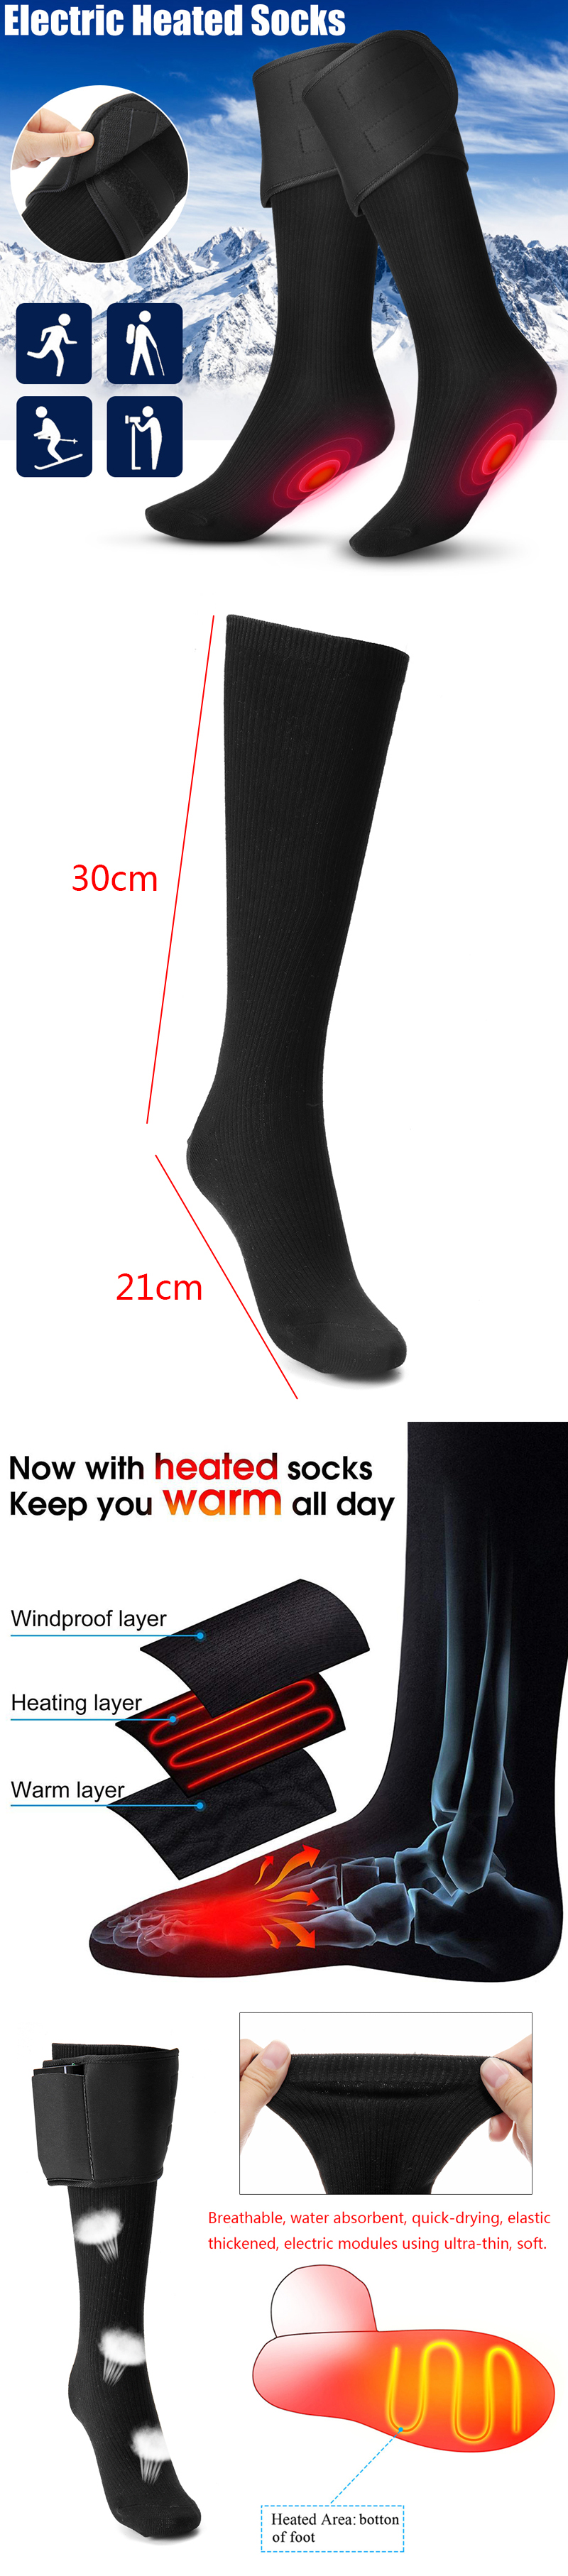 1-Pair-Electric-Heated-Socks-Feet-Winter-Warmer-Thermal-Sock-For-Cycling-Skiing-Camping-1427112